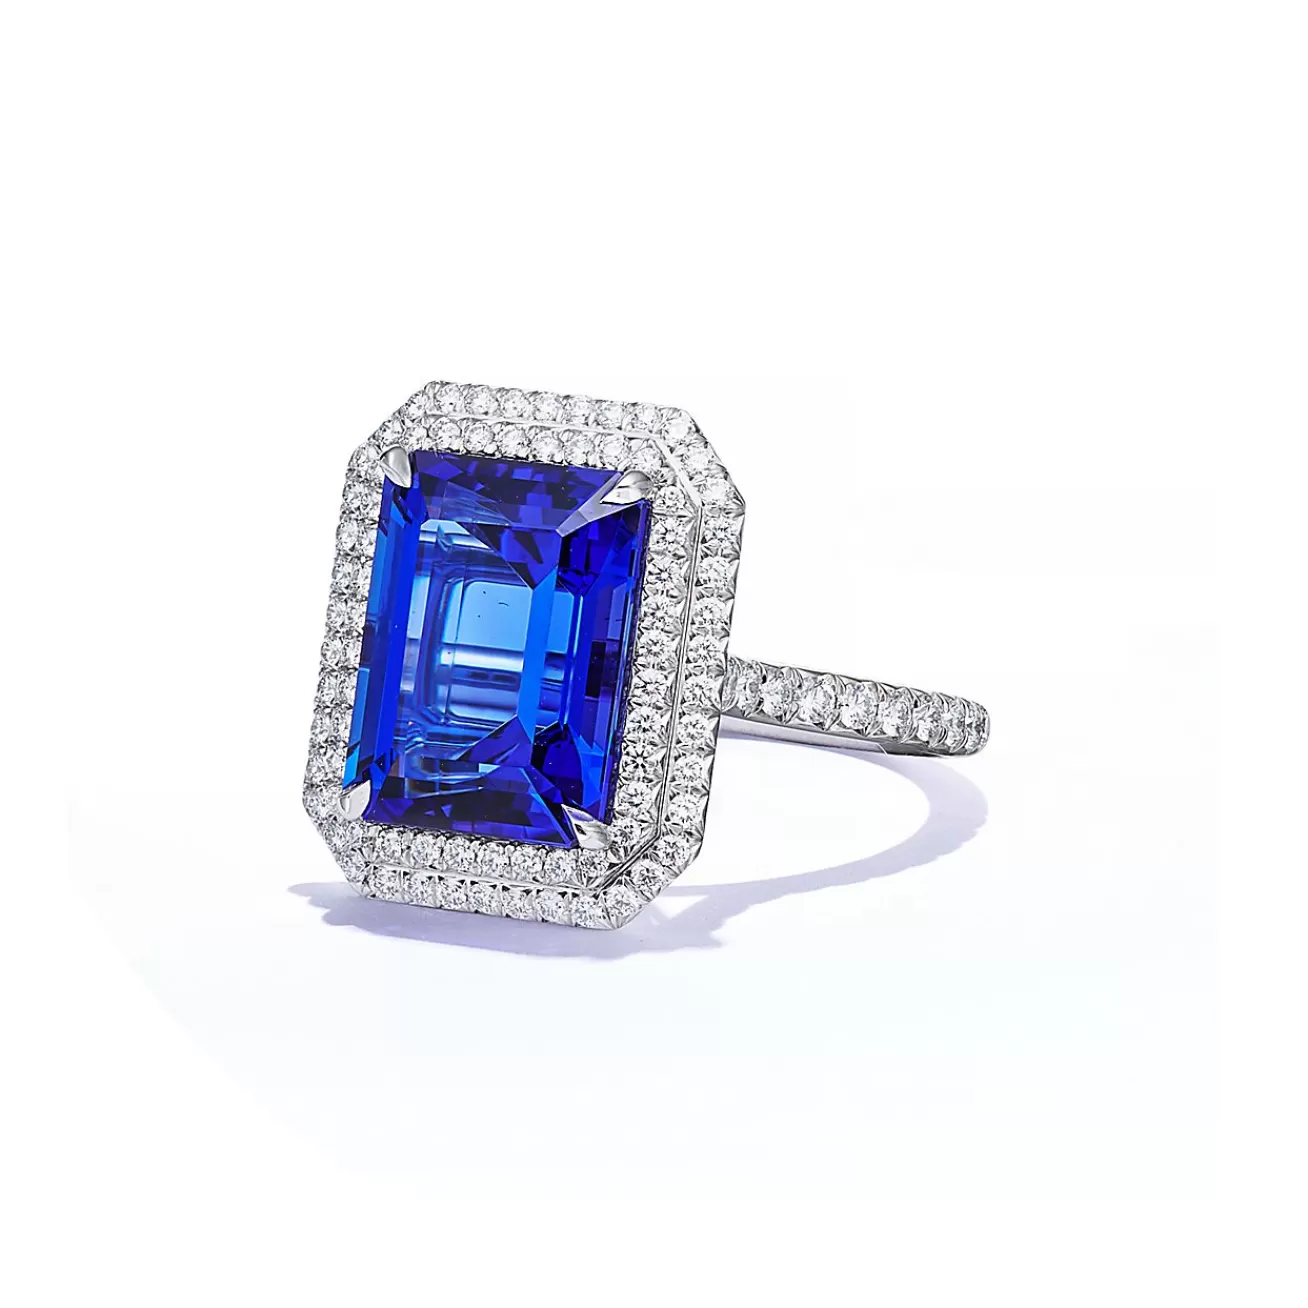 Tiffany & Co. Ring in Platinum with a Tanzanite and Diamonds | ^ Rings | Diamond Jewelry